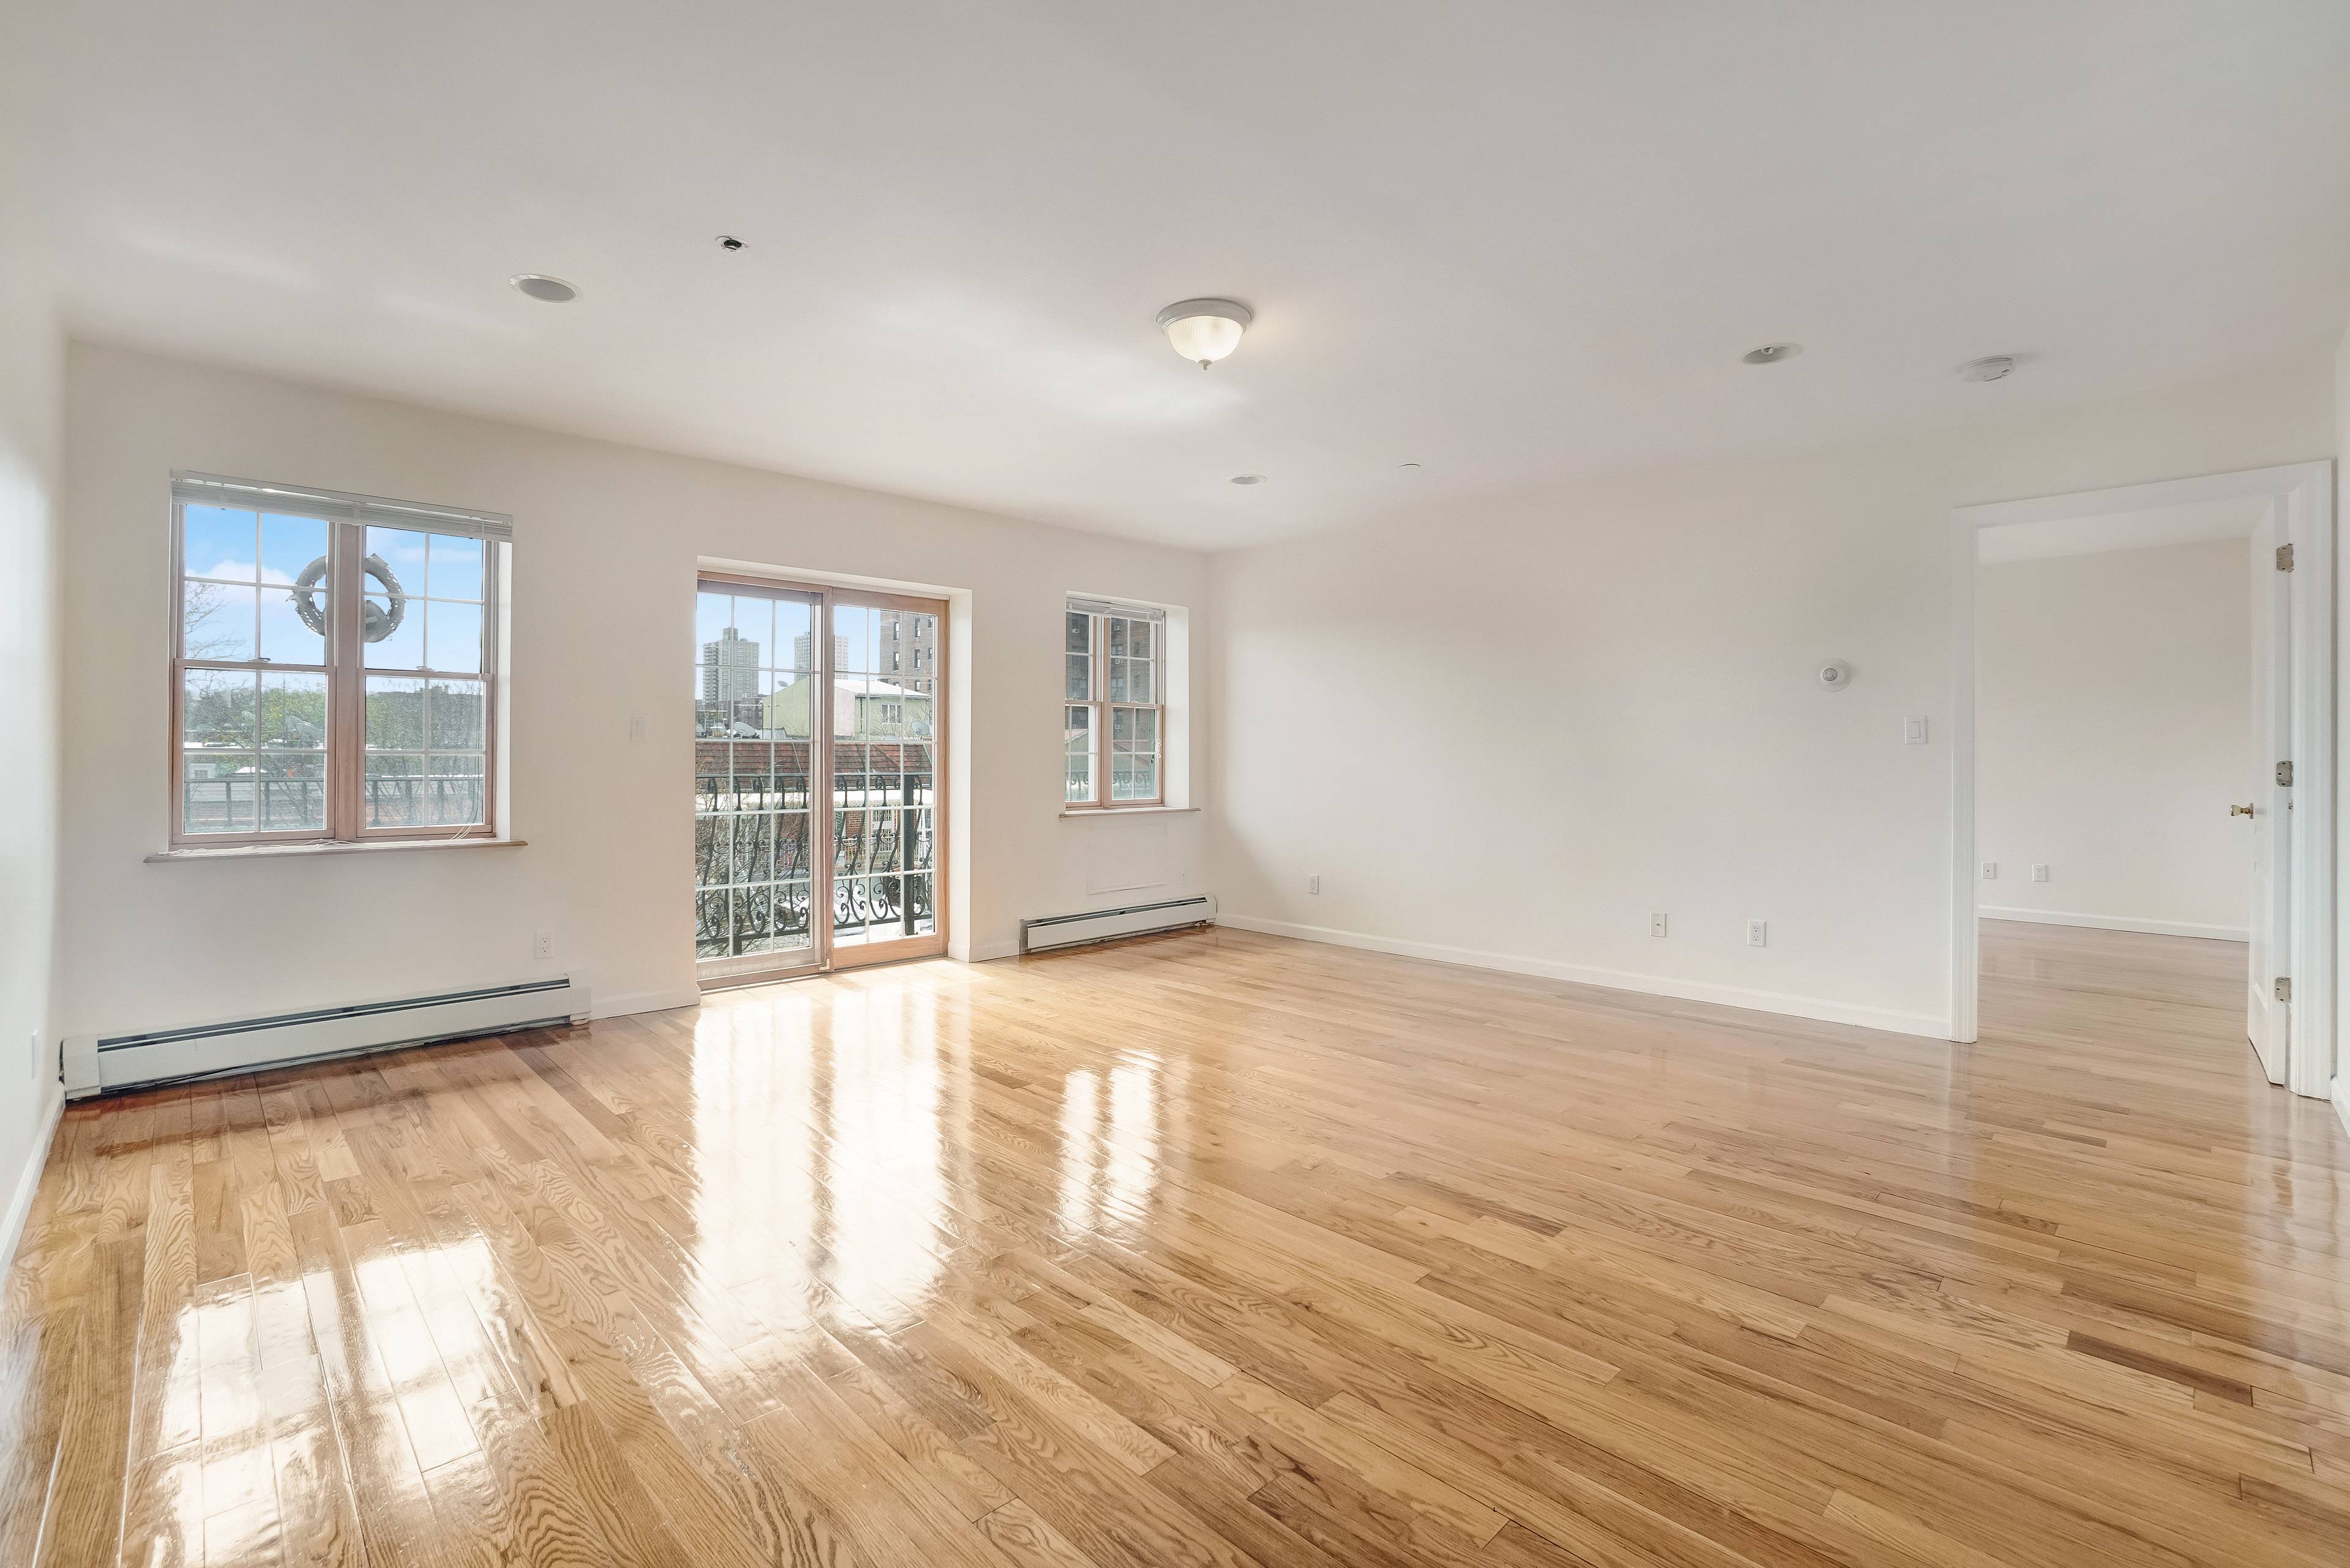 Forest Hills/Rego Park: South Exposed 2 Bedroom 2 Bathroom with Balcony in Elevator/Laundry Condo